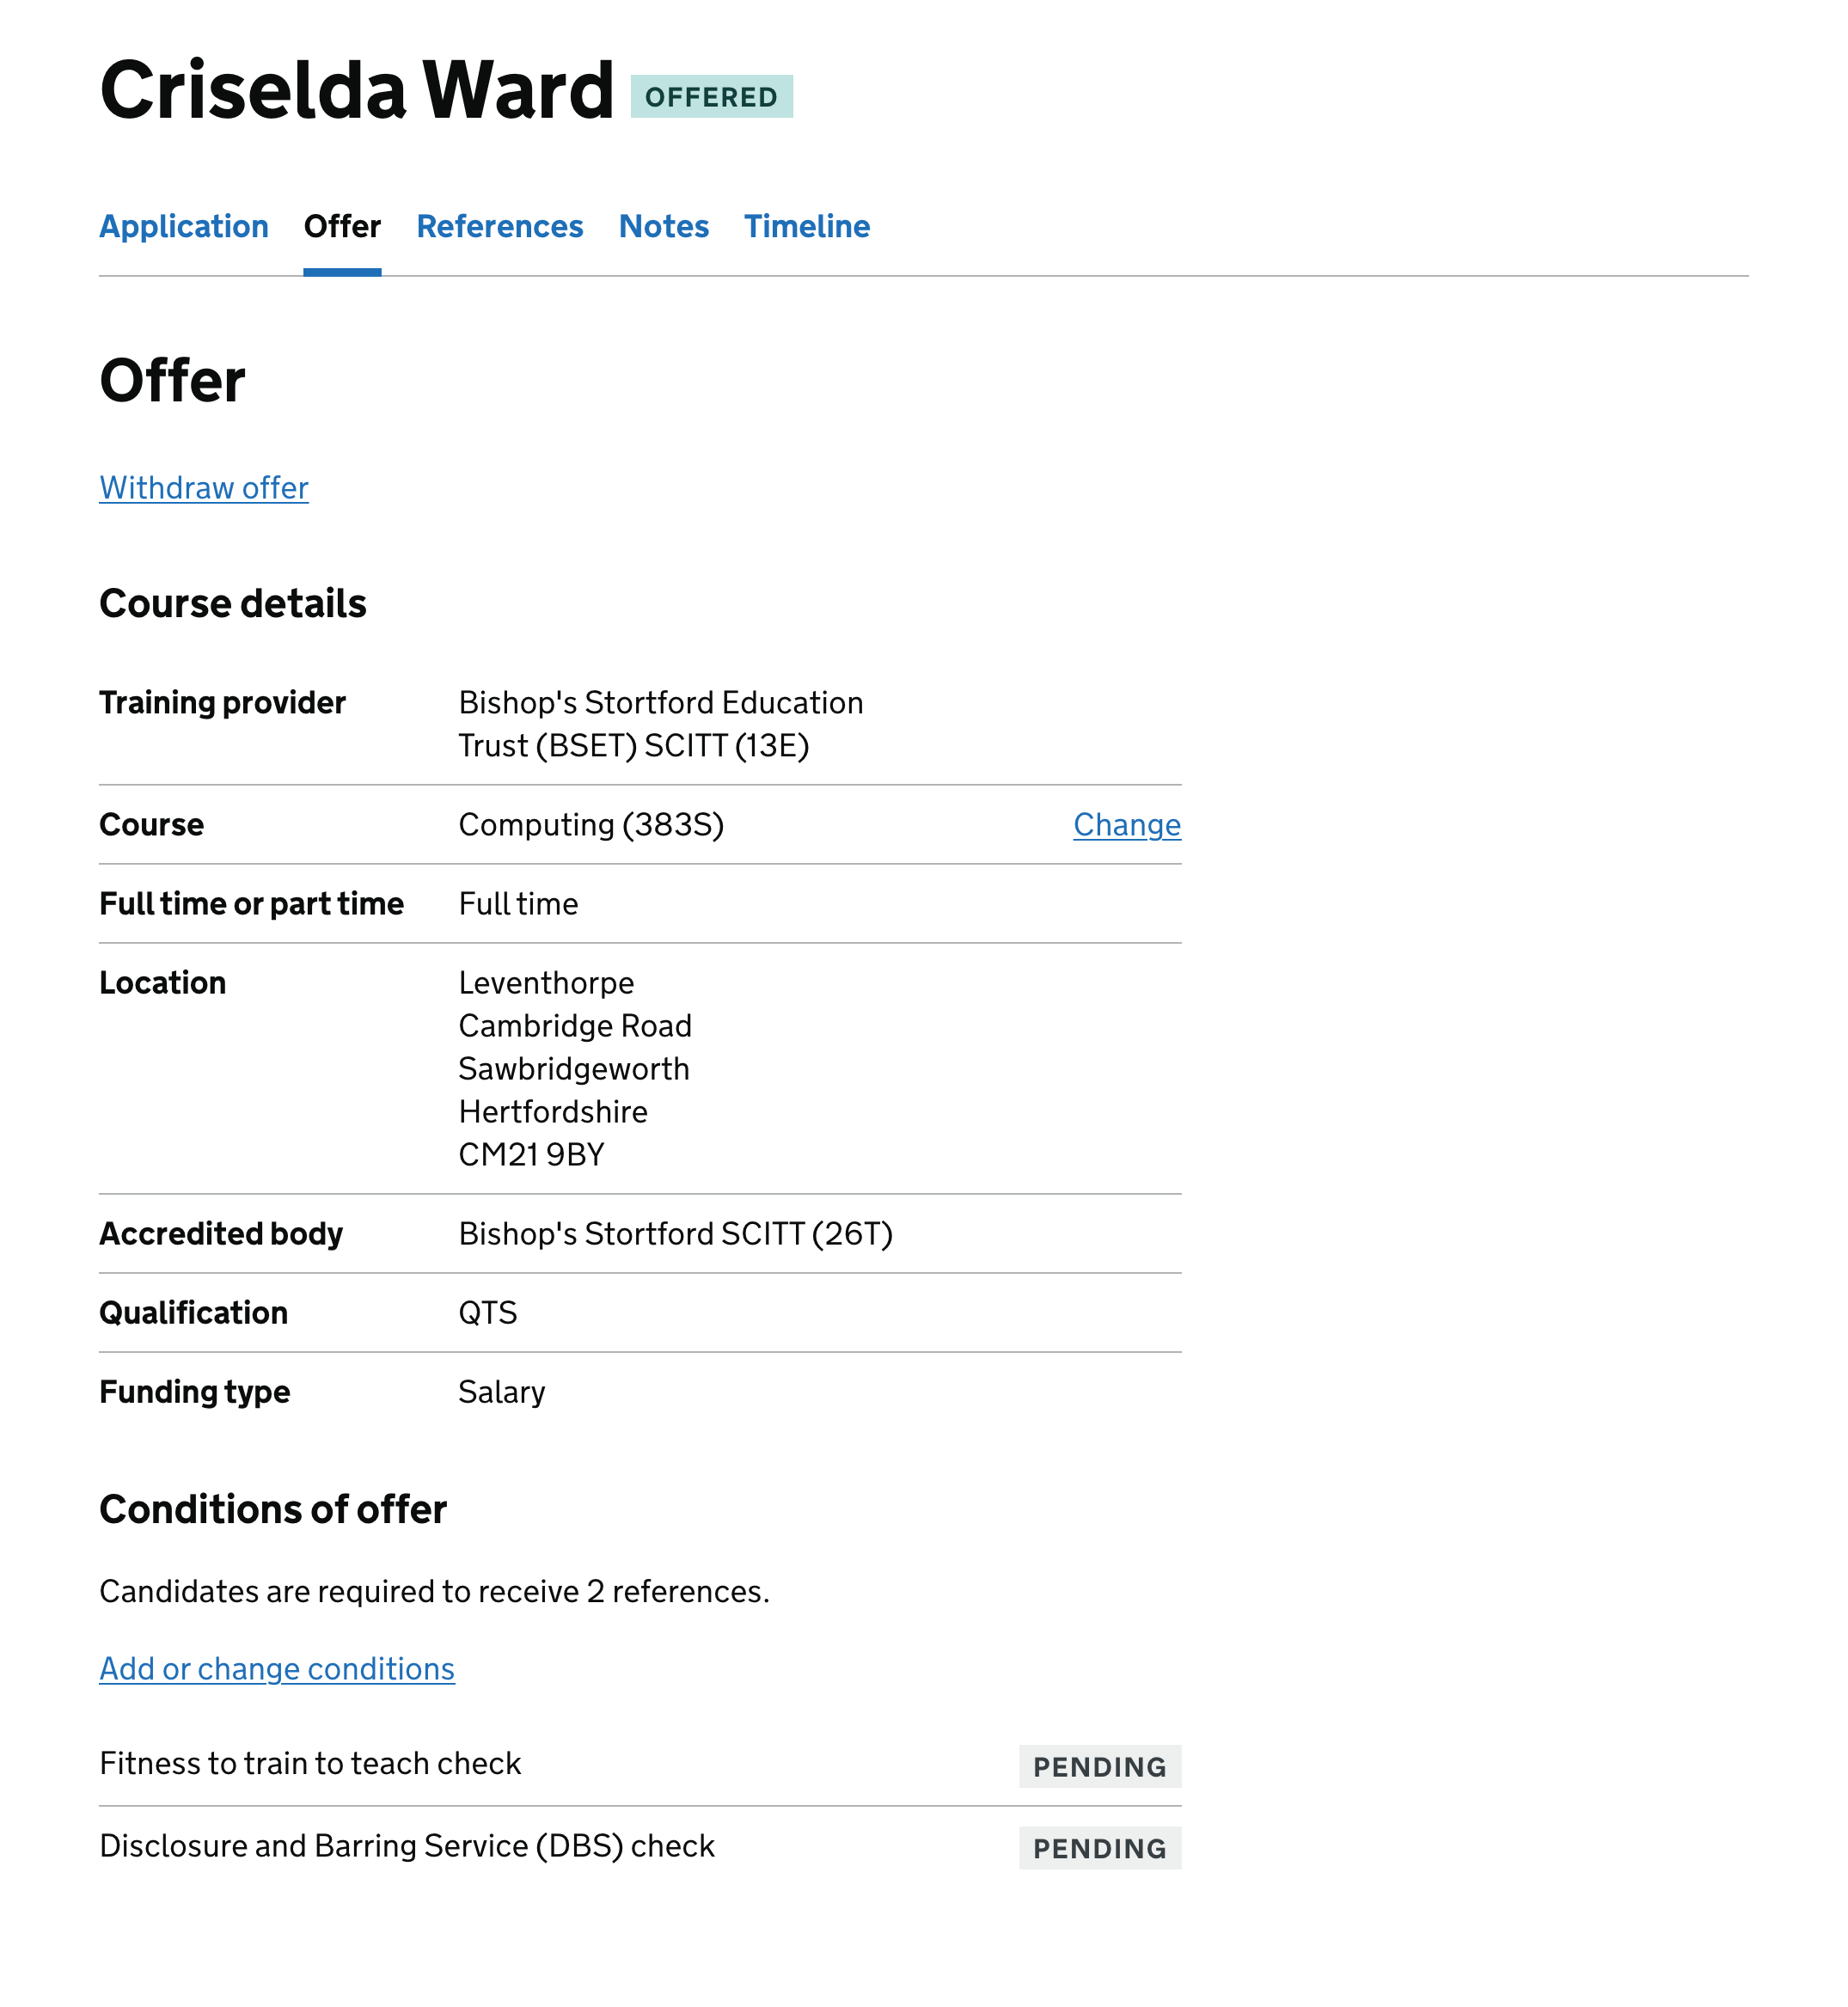 Screenshot of a page with the title ‘Criselda Ward‘, which is the name of the candidate. Under this is a navigation section with tabs for application, offer, references, notes and timeline. The user is currently in the offer tab. There’s a link to withdraw the offer, and under that are course details: training provider, course, full time or part time, location, accredited bodt, qualification and funding type. The conditions of offer section beneath this mentions that the candidate needs 2 references. There’s a link to add or change conditions.